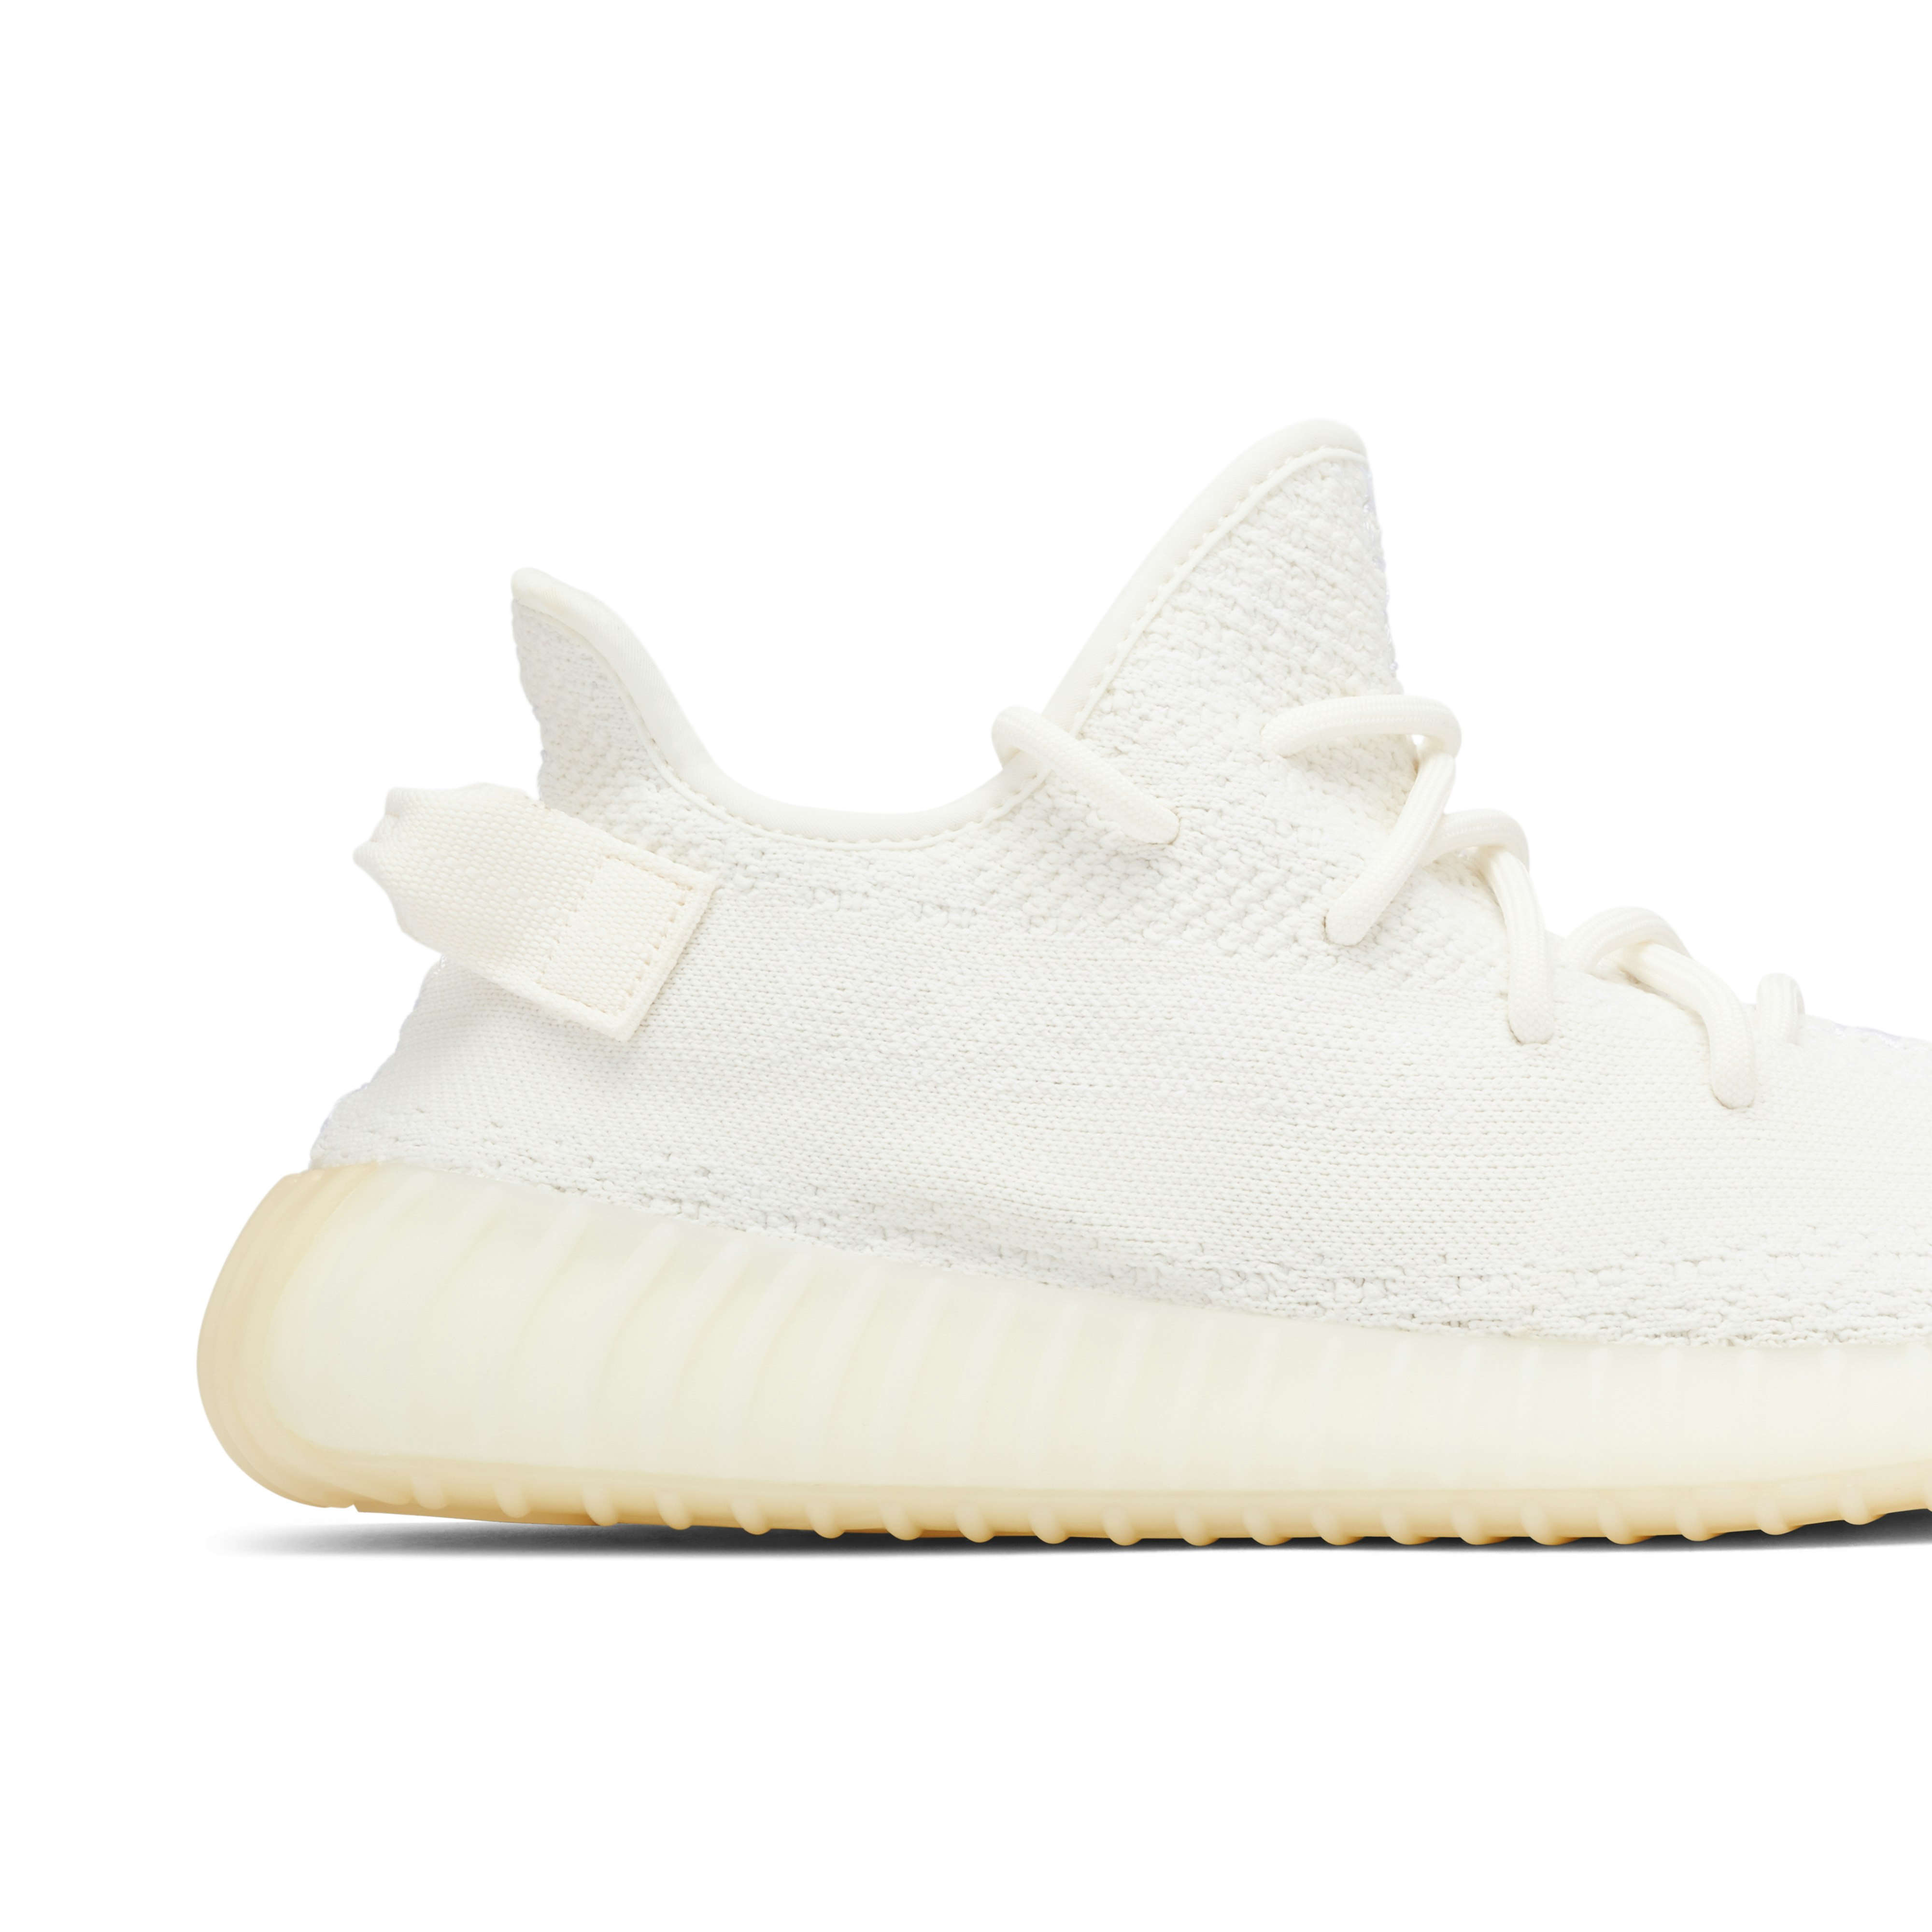 Adidas Yeezy Boost 350 V2 White Pl Sneakers | IsuiT